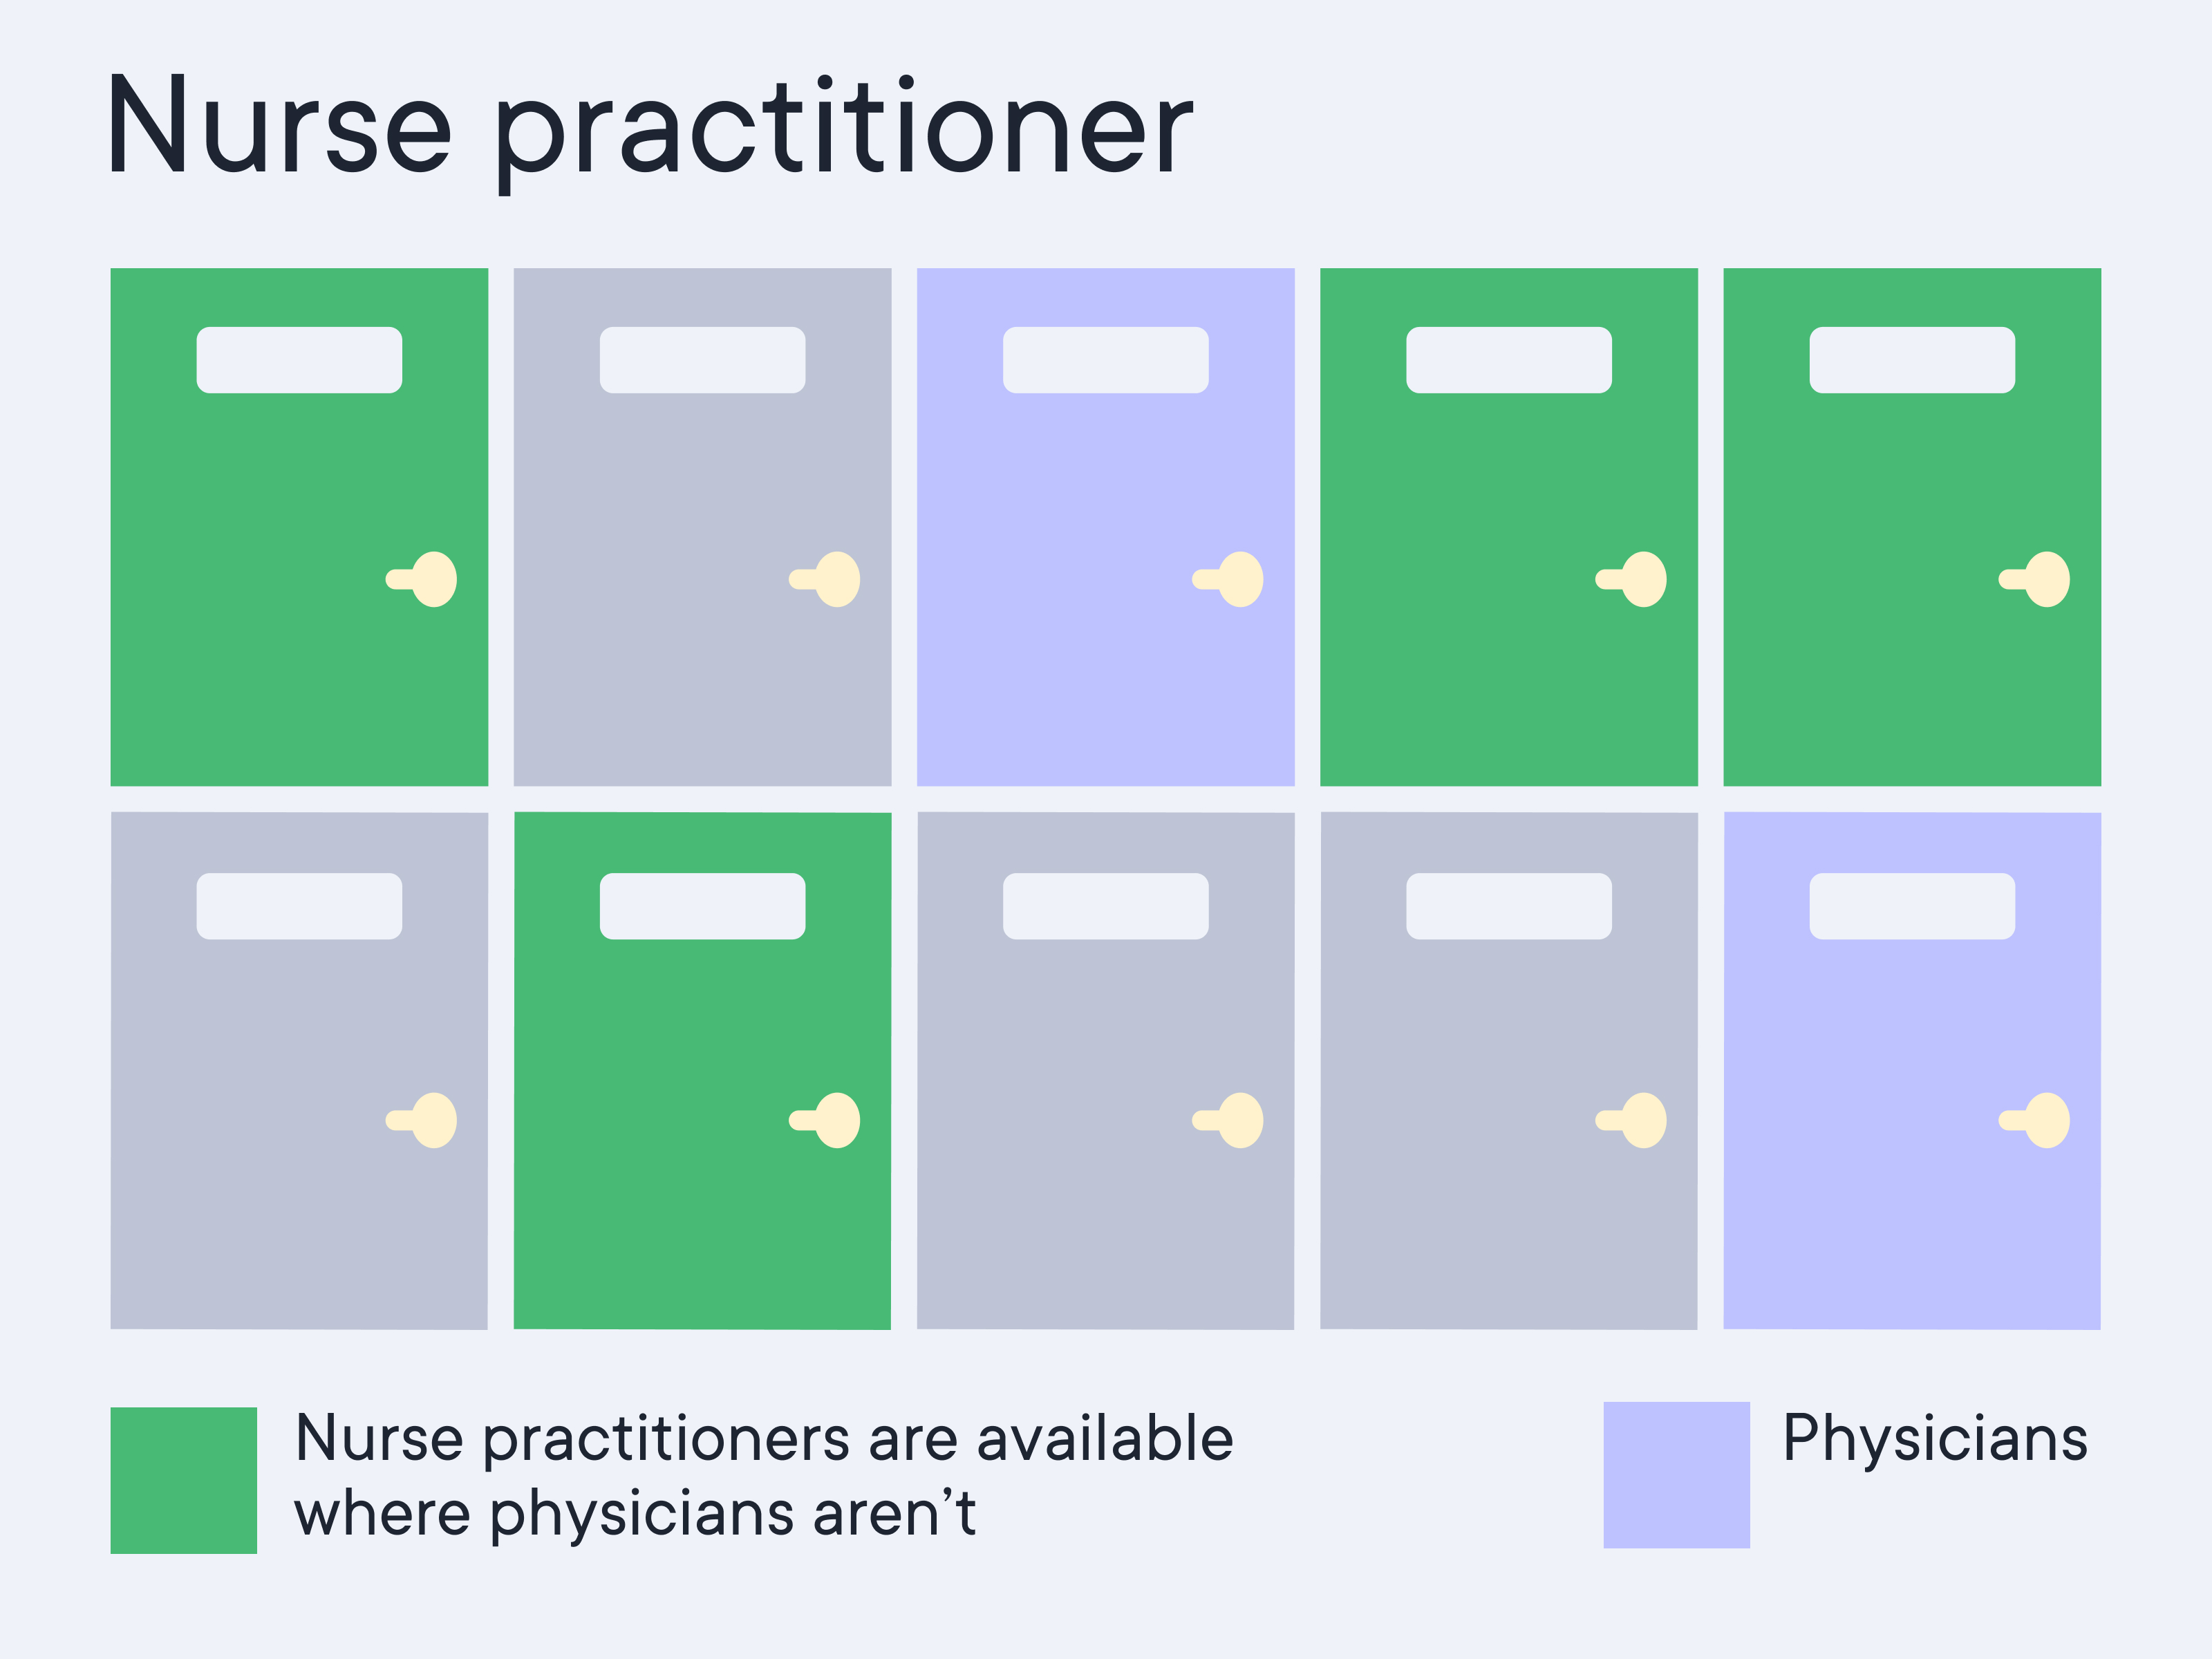 Nurse practitioners are available where physicians aren't